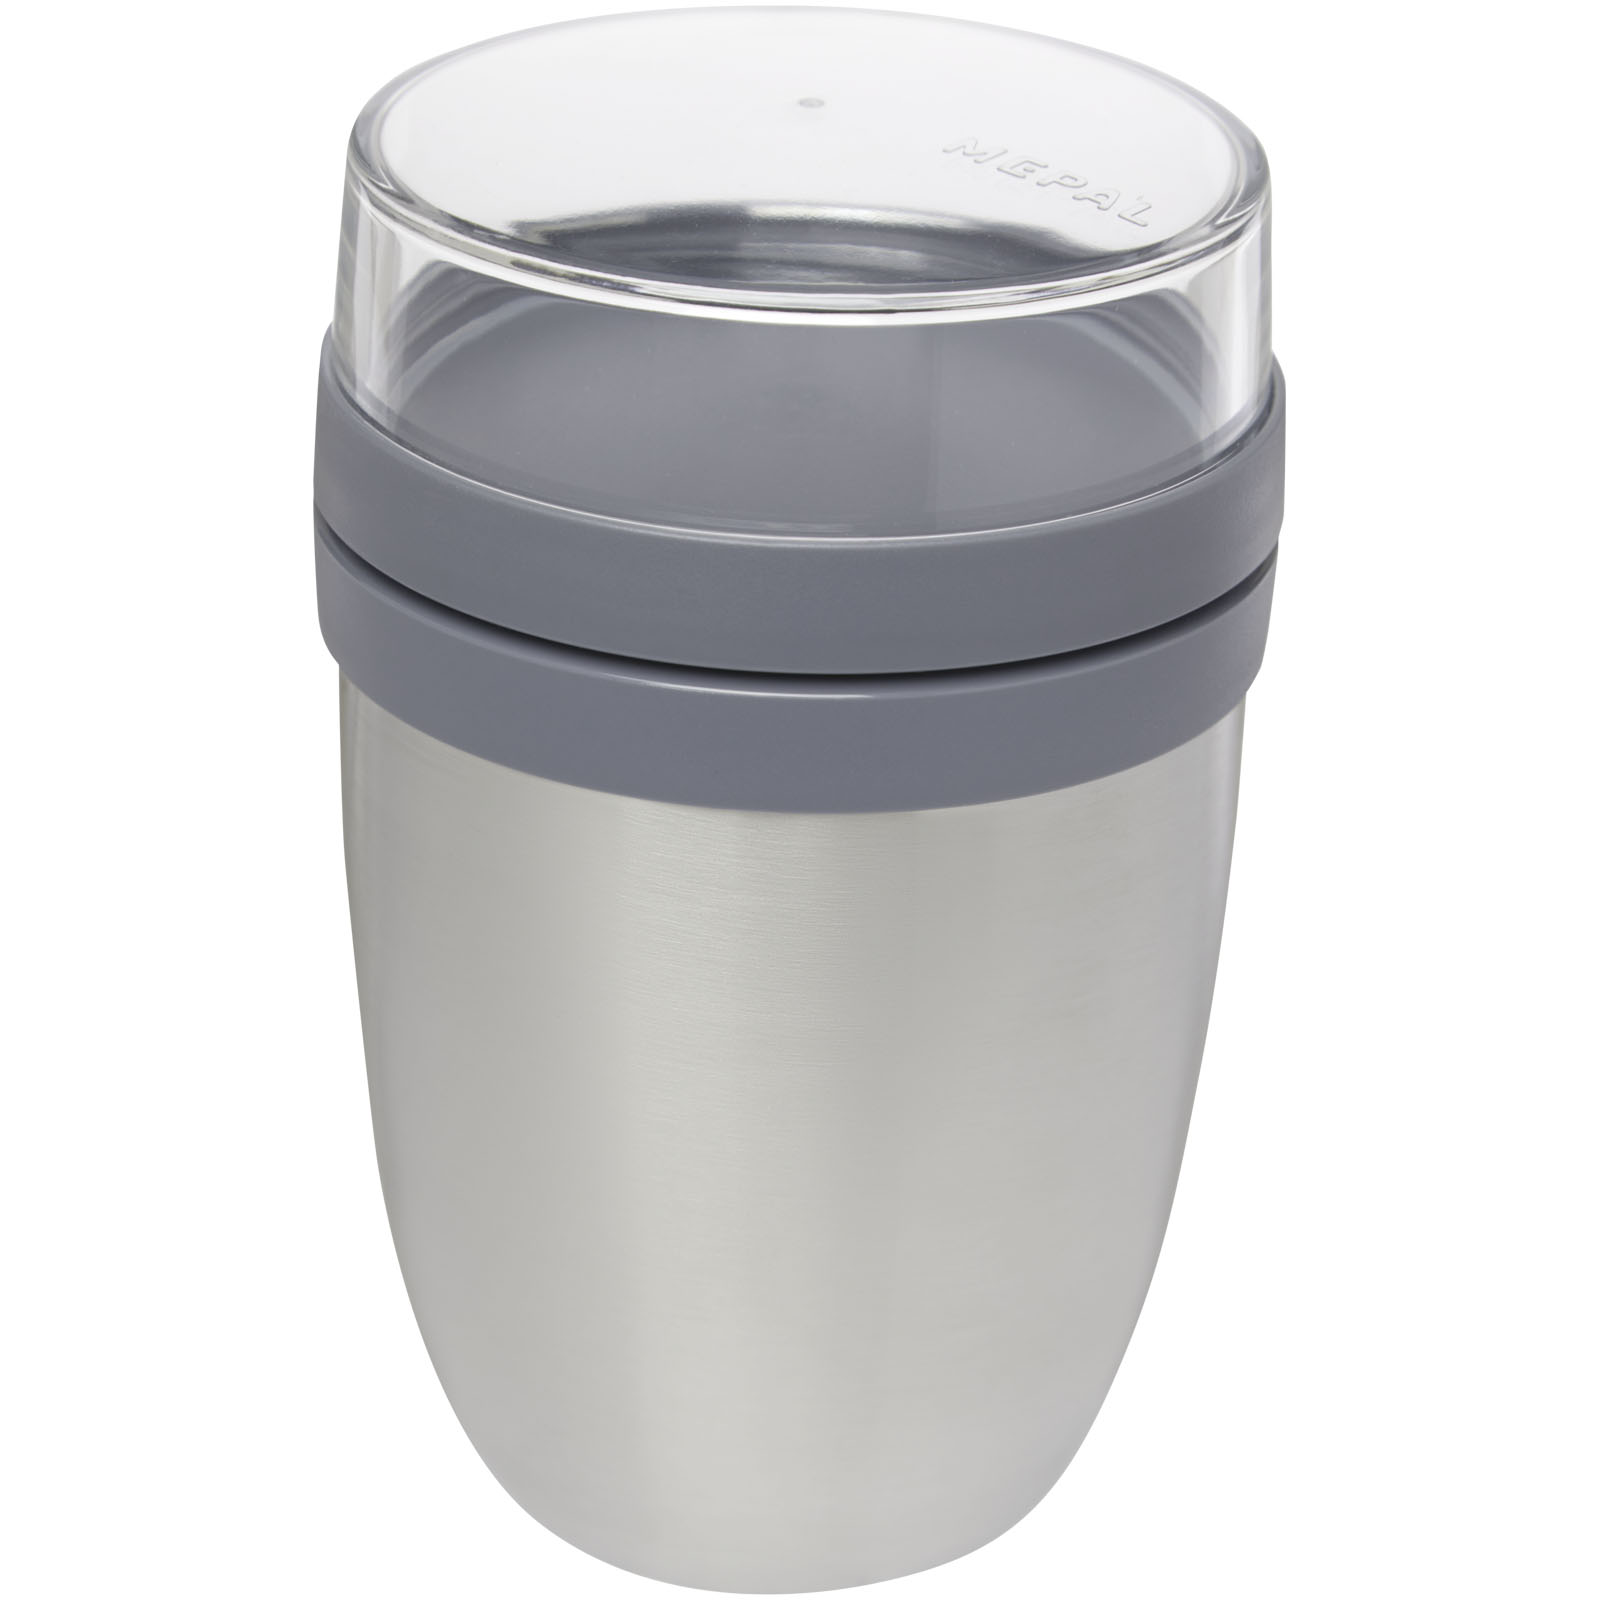 Home & Kitchen - Mepal Ellipse insulated lunch pot